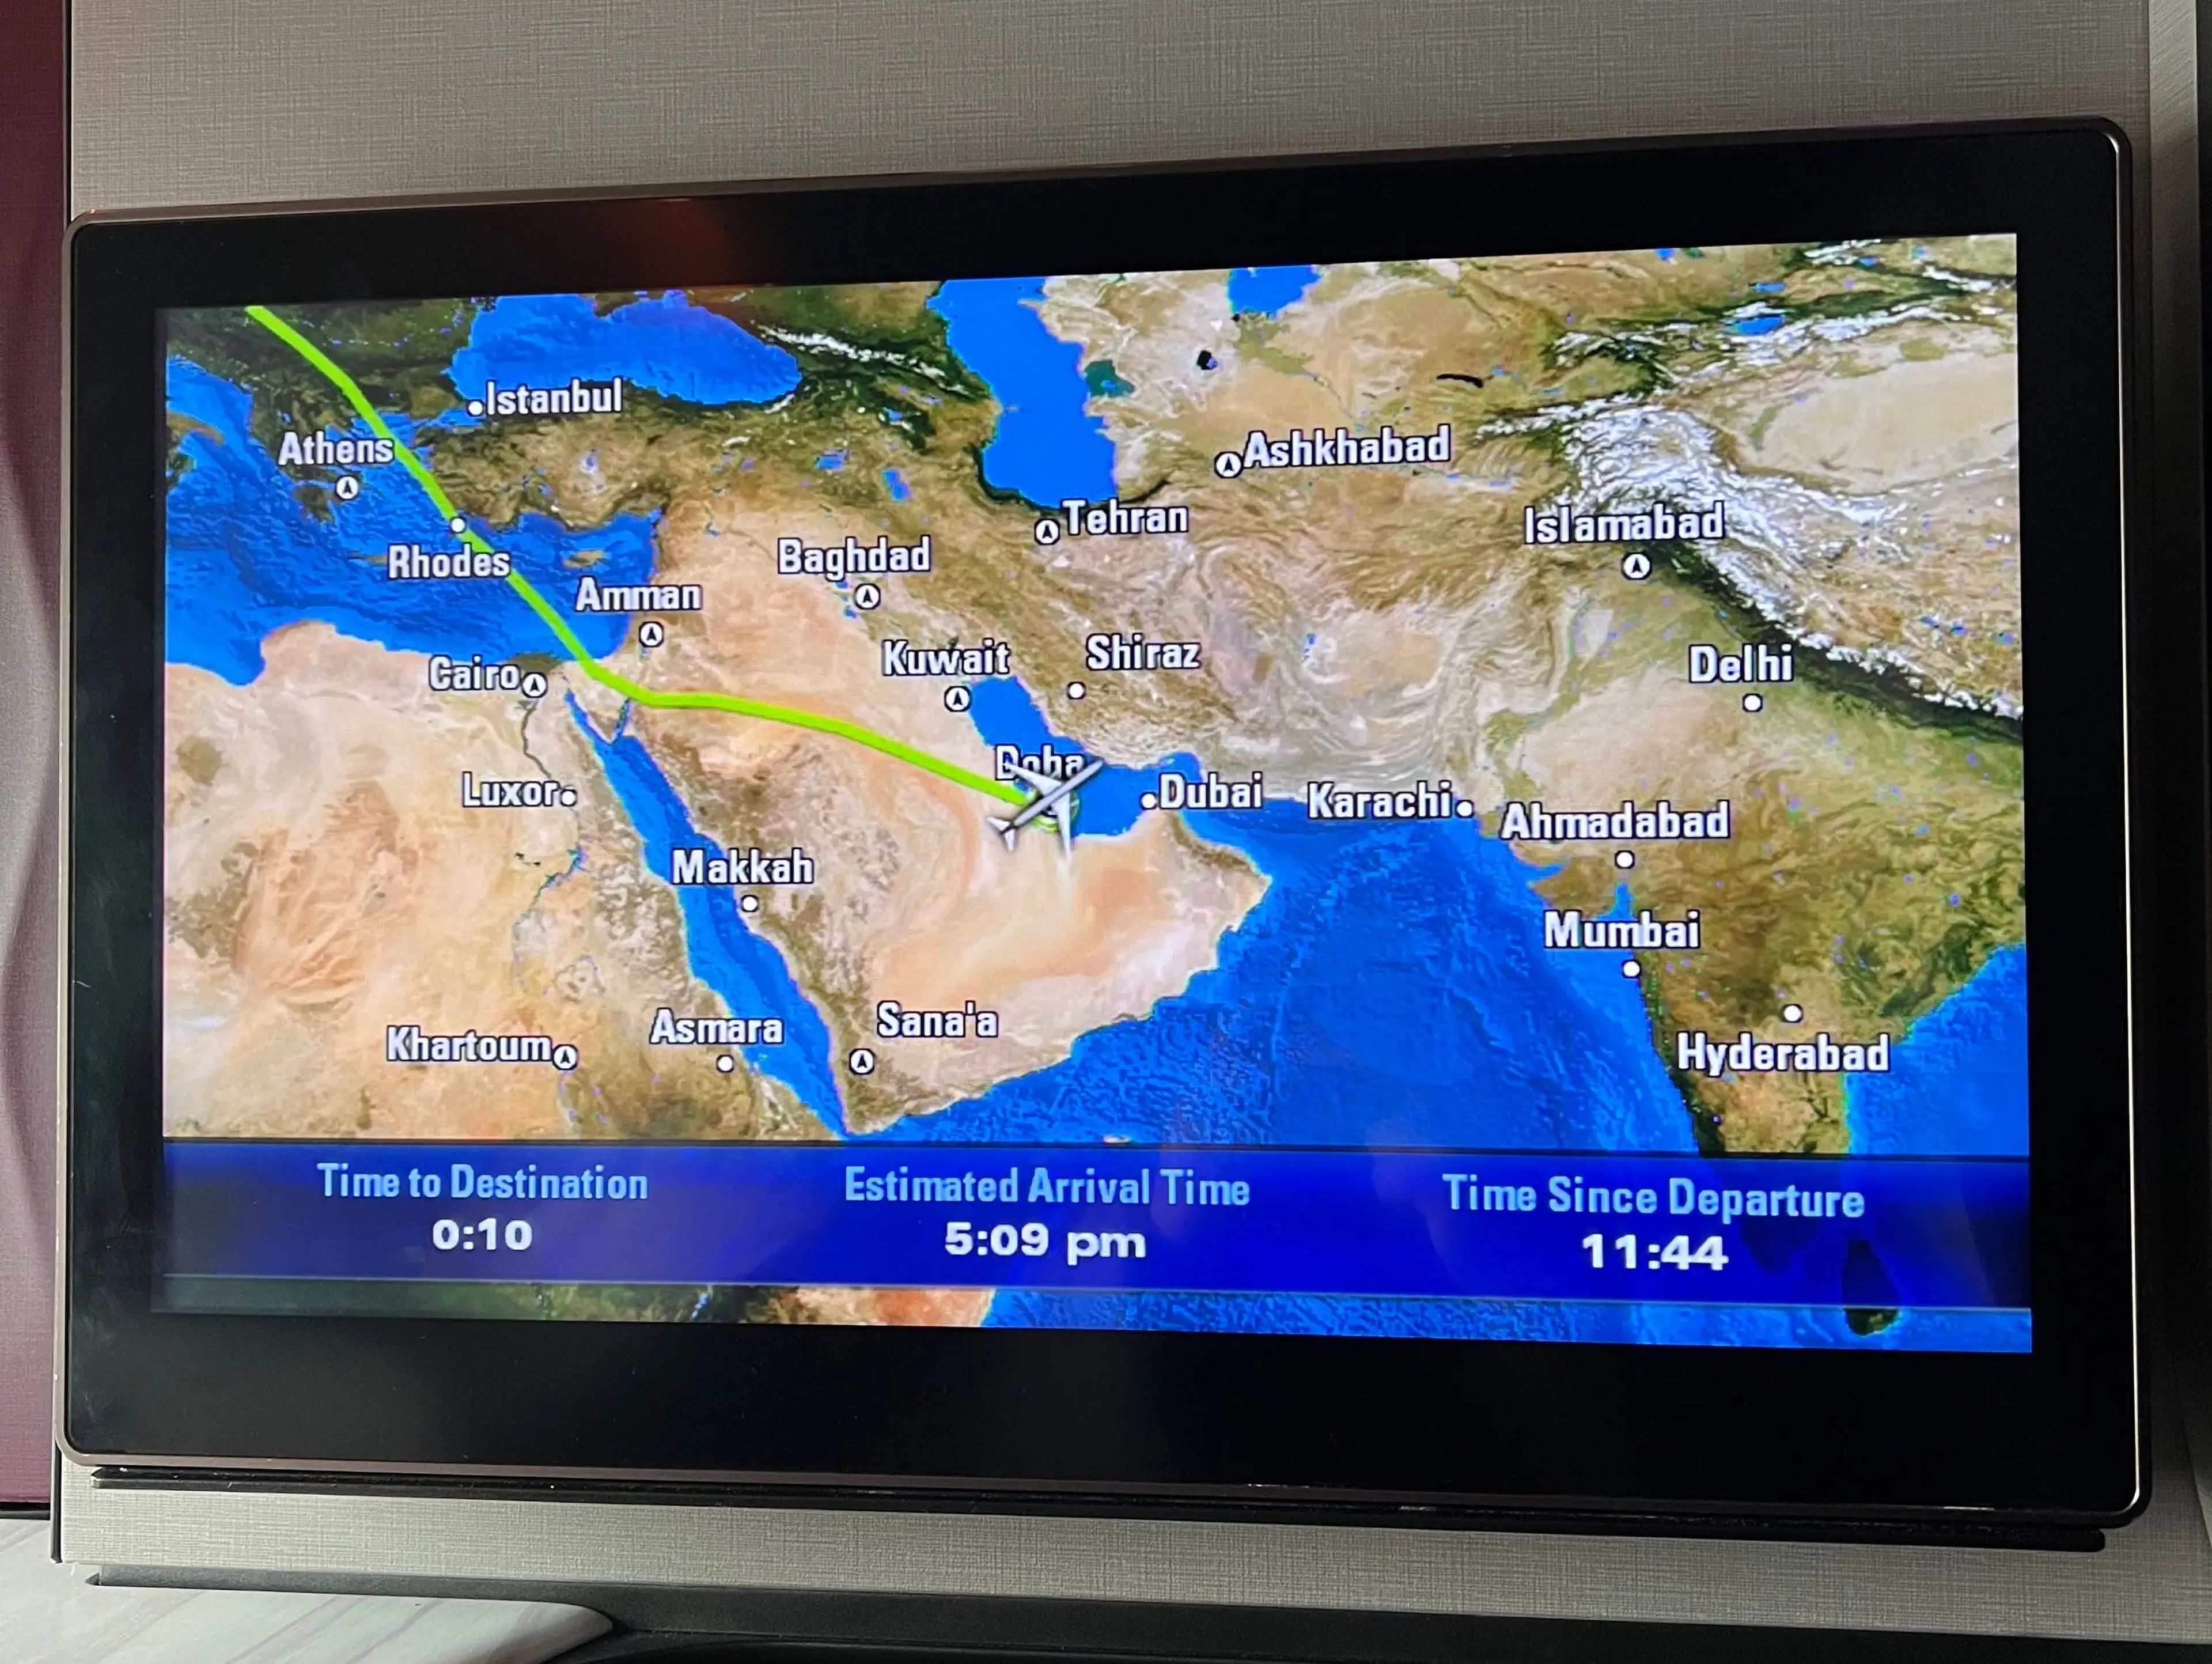 Onboard, the flight map was very detailed.